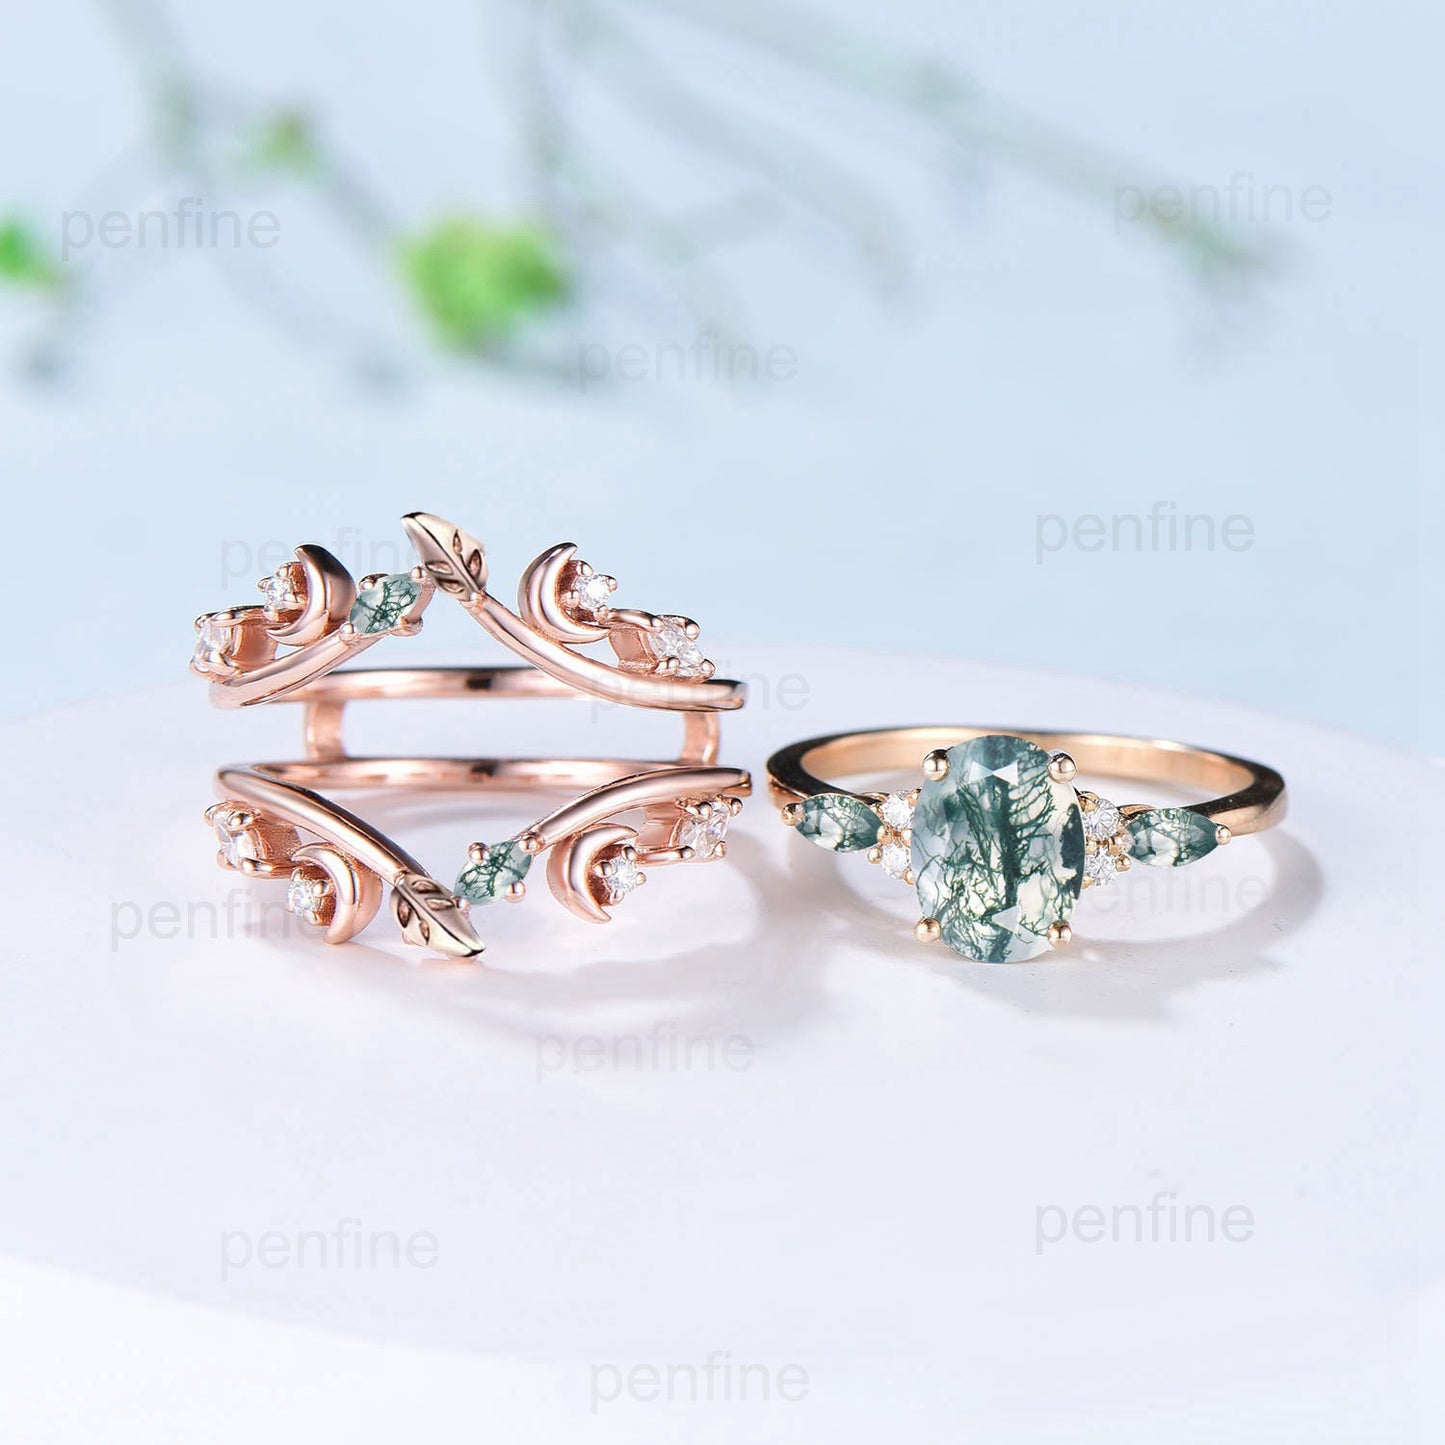 1.5CT Natural Oval Moss Agate Engagement Ring Set Marquise Aquatic Agate Moon Wedding Ring Nature Inspired Double Leaf Stacking Bridal Set - PENFINE